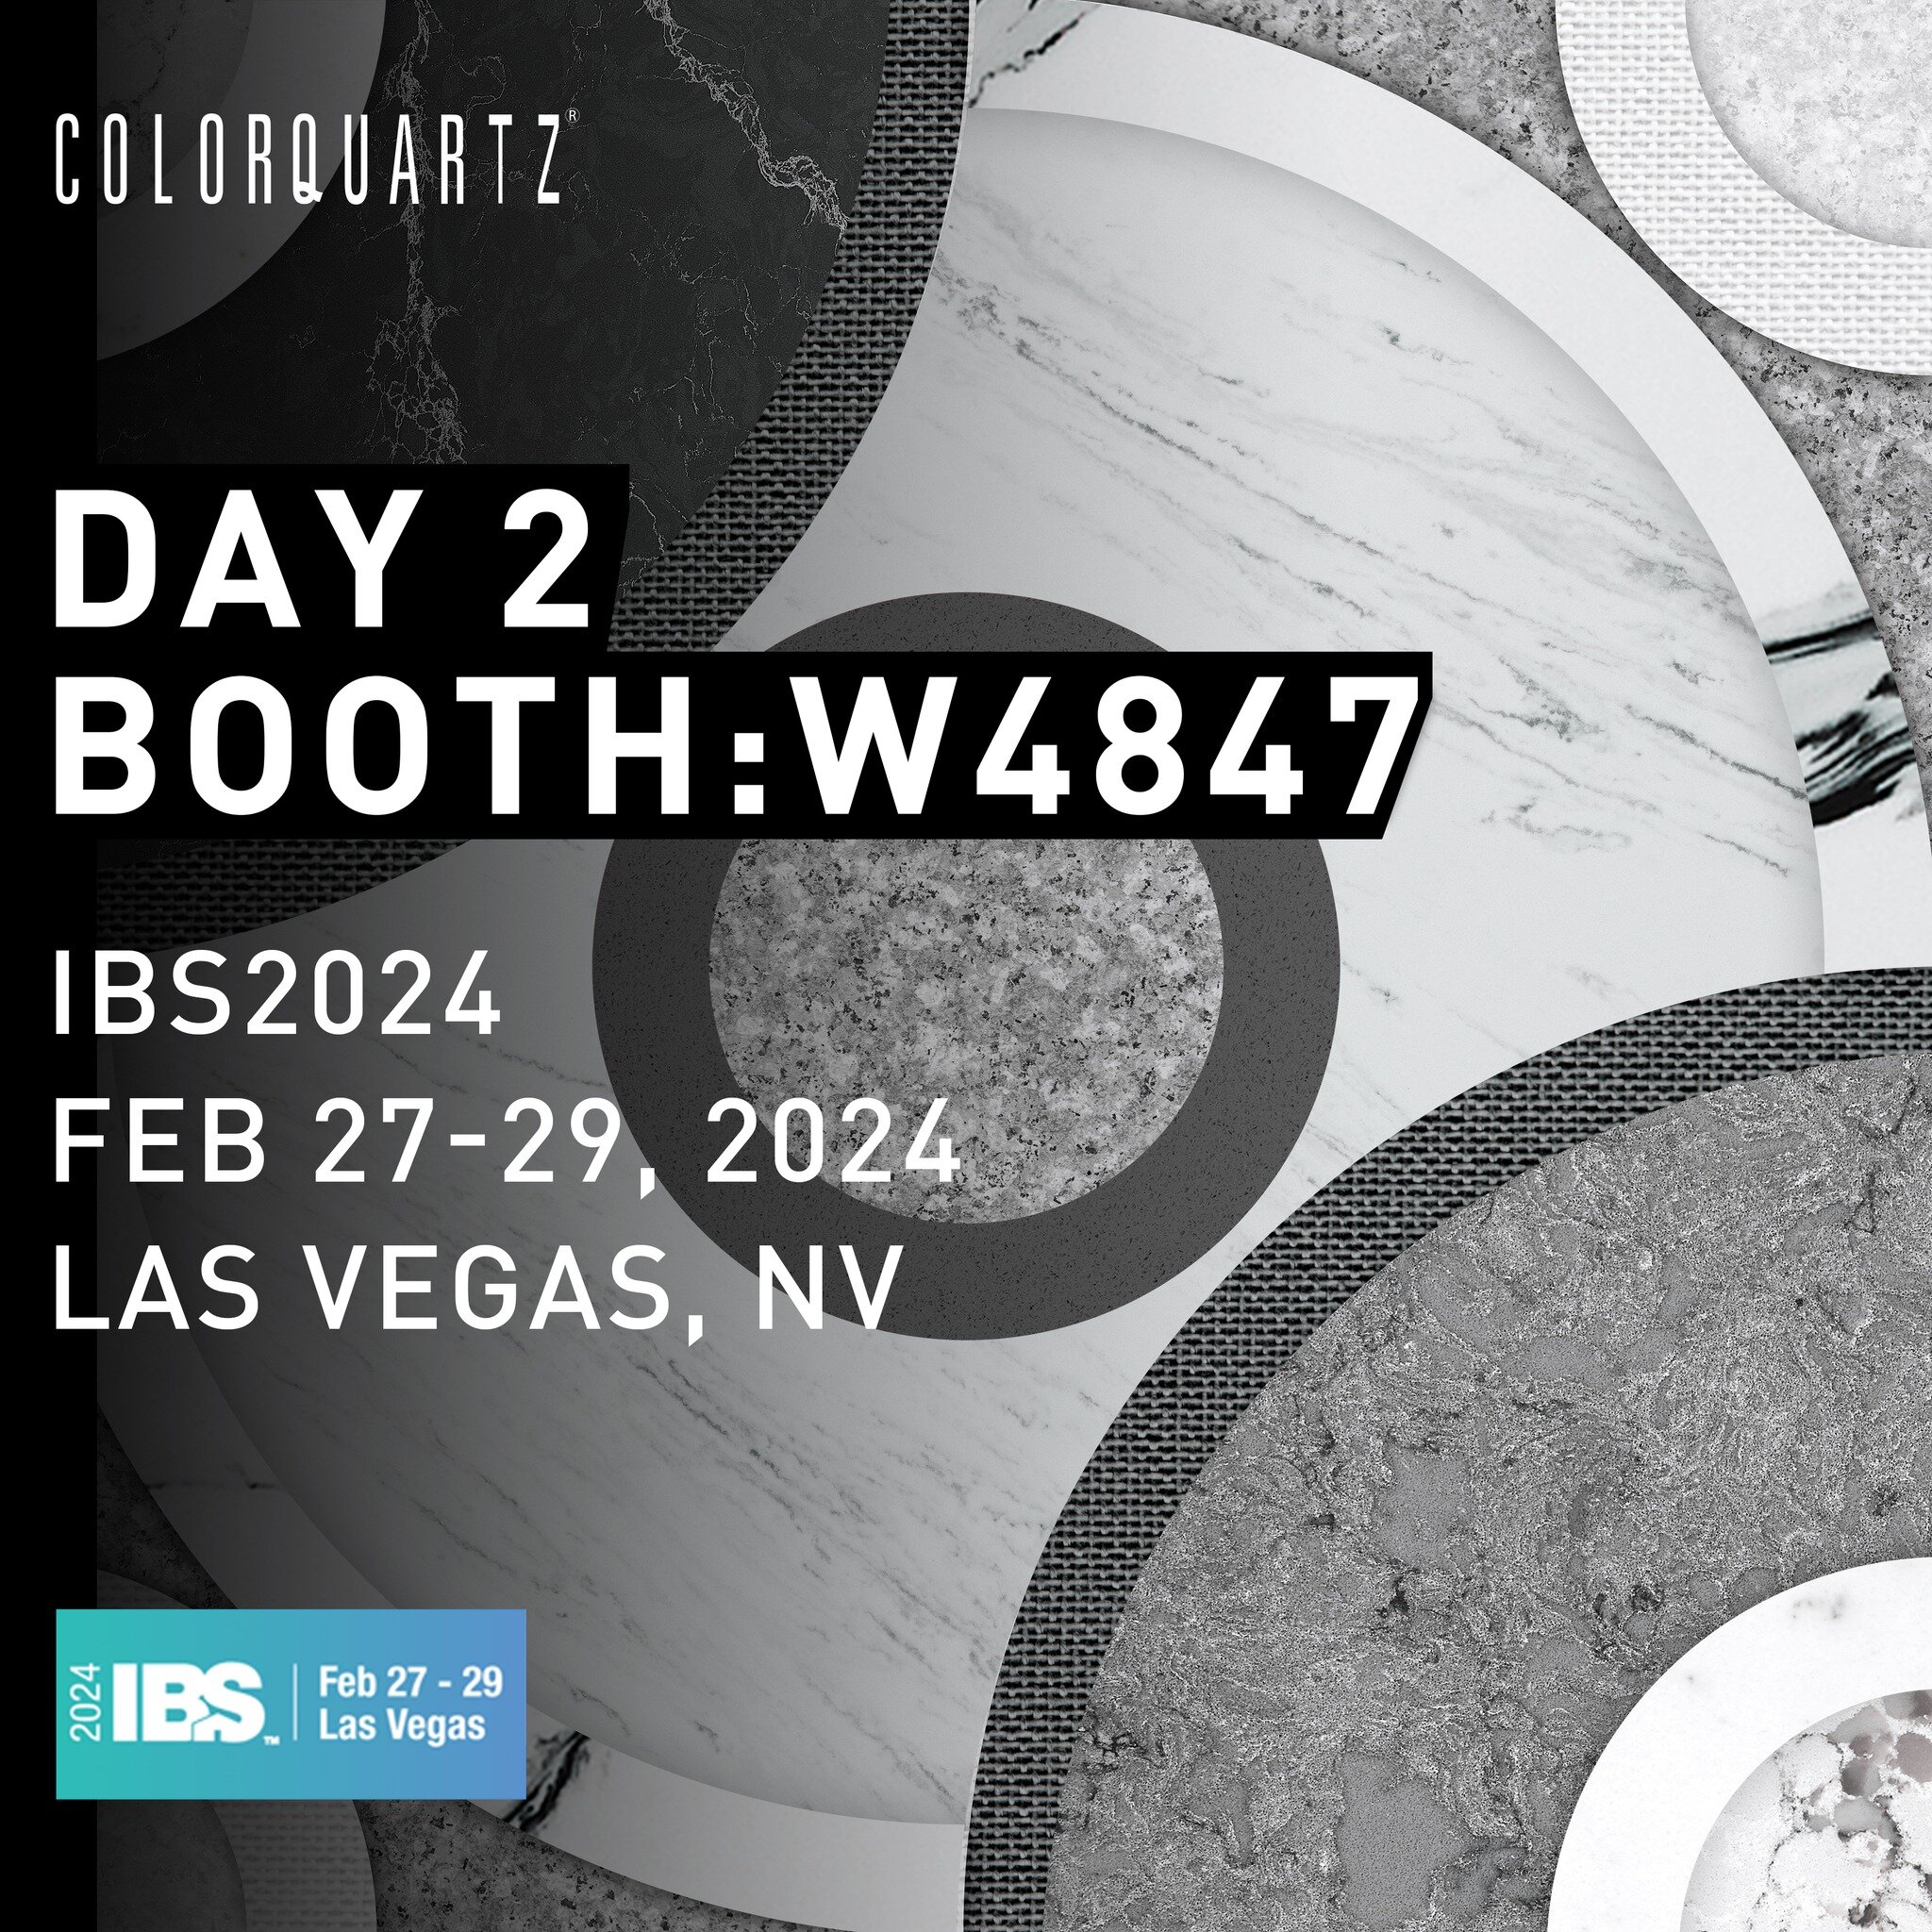 Day 2 at the International Builders' Show (IBS) 2024 is here! Don't miss out on the excitement! Swing by booth W4847 and discover the latest trends and innovations in the construction industry. We can't wait to connect with you and explore new possib